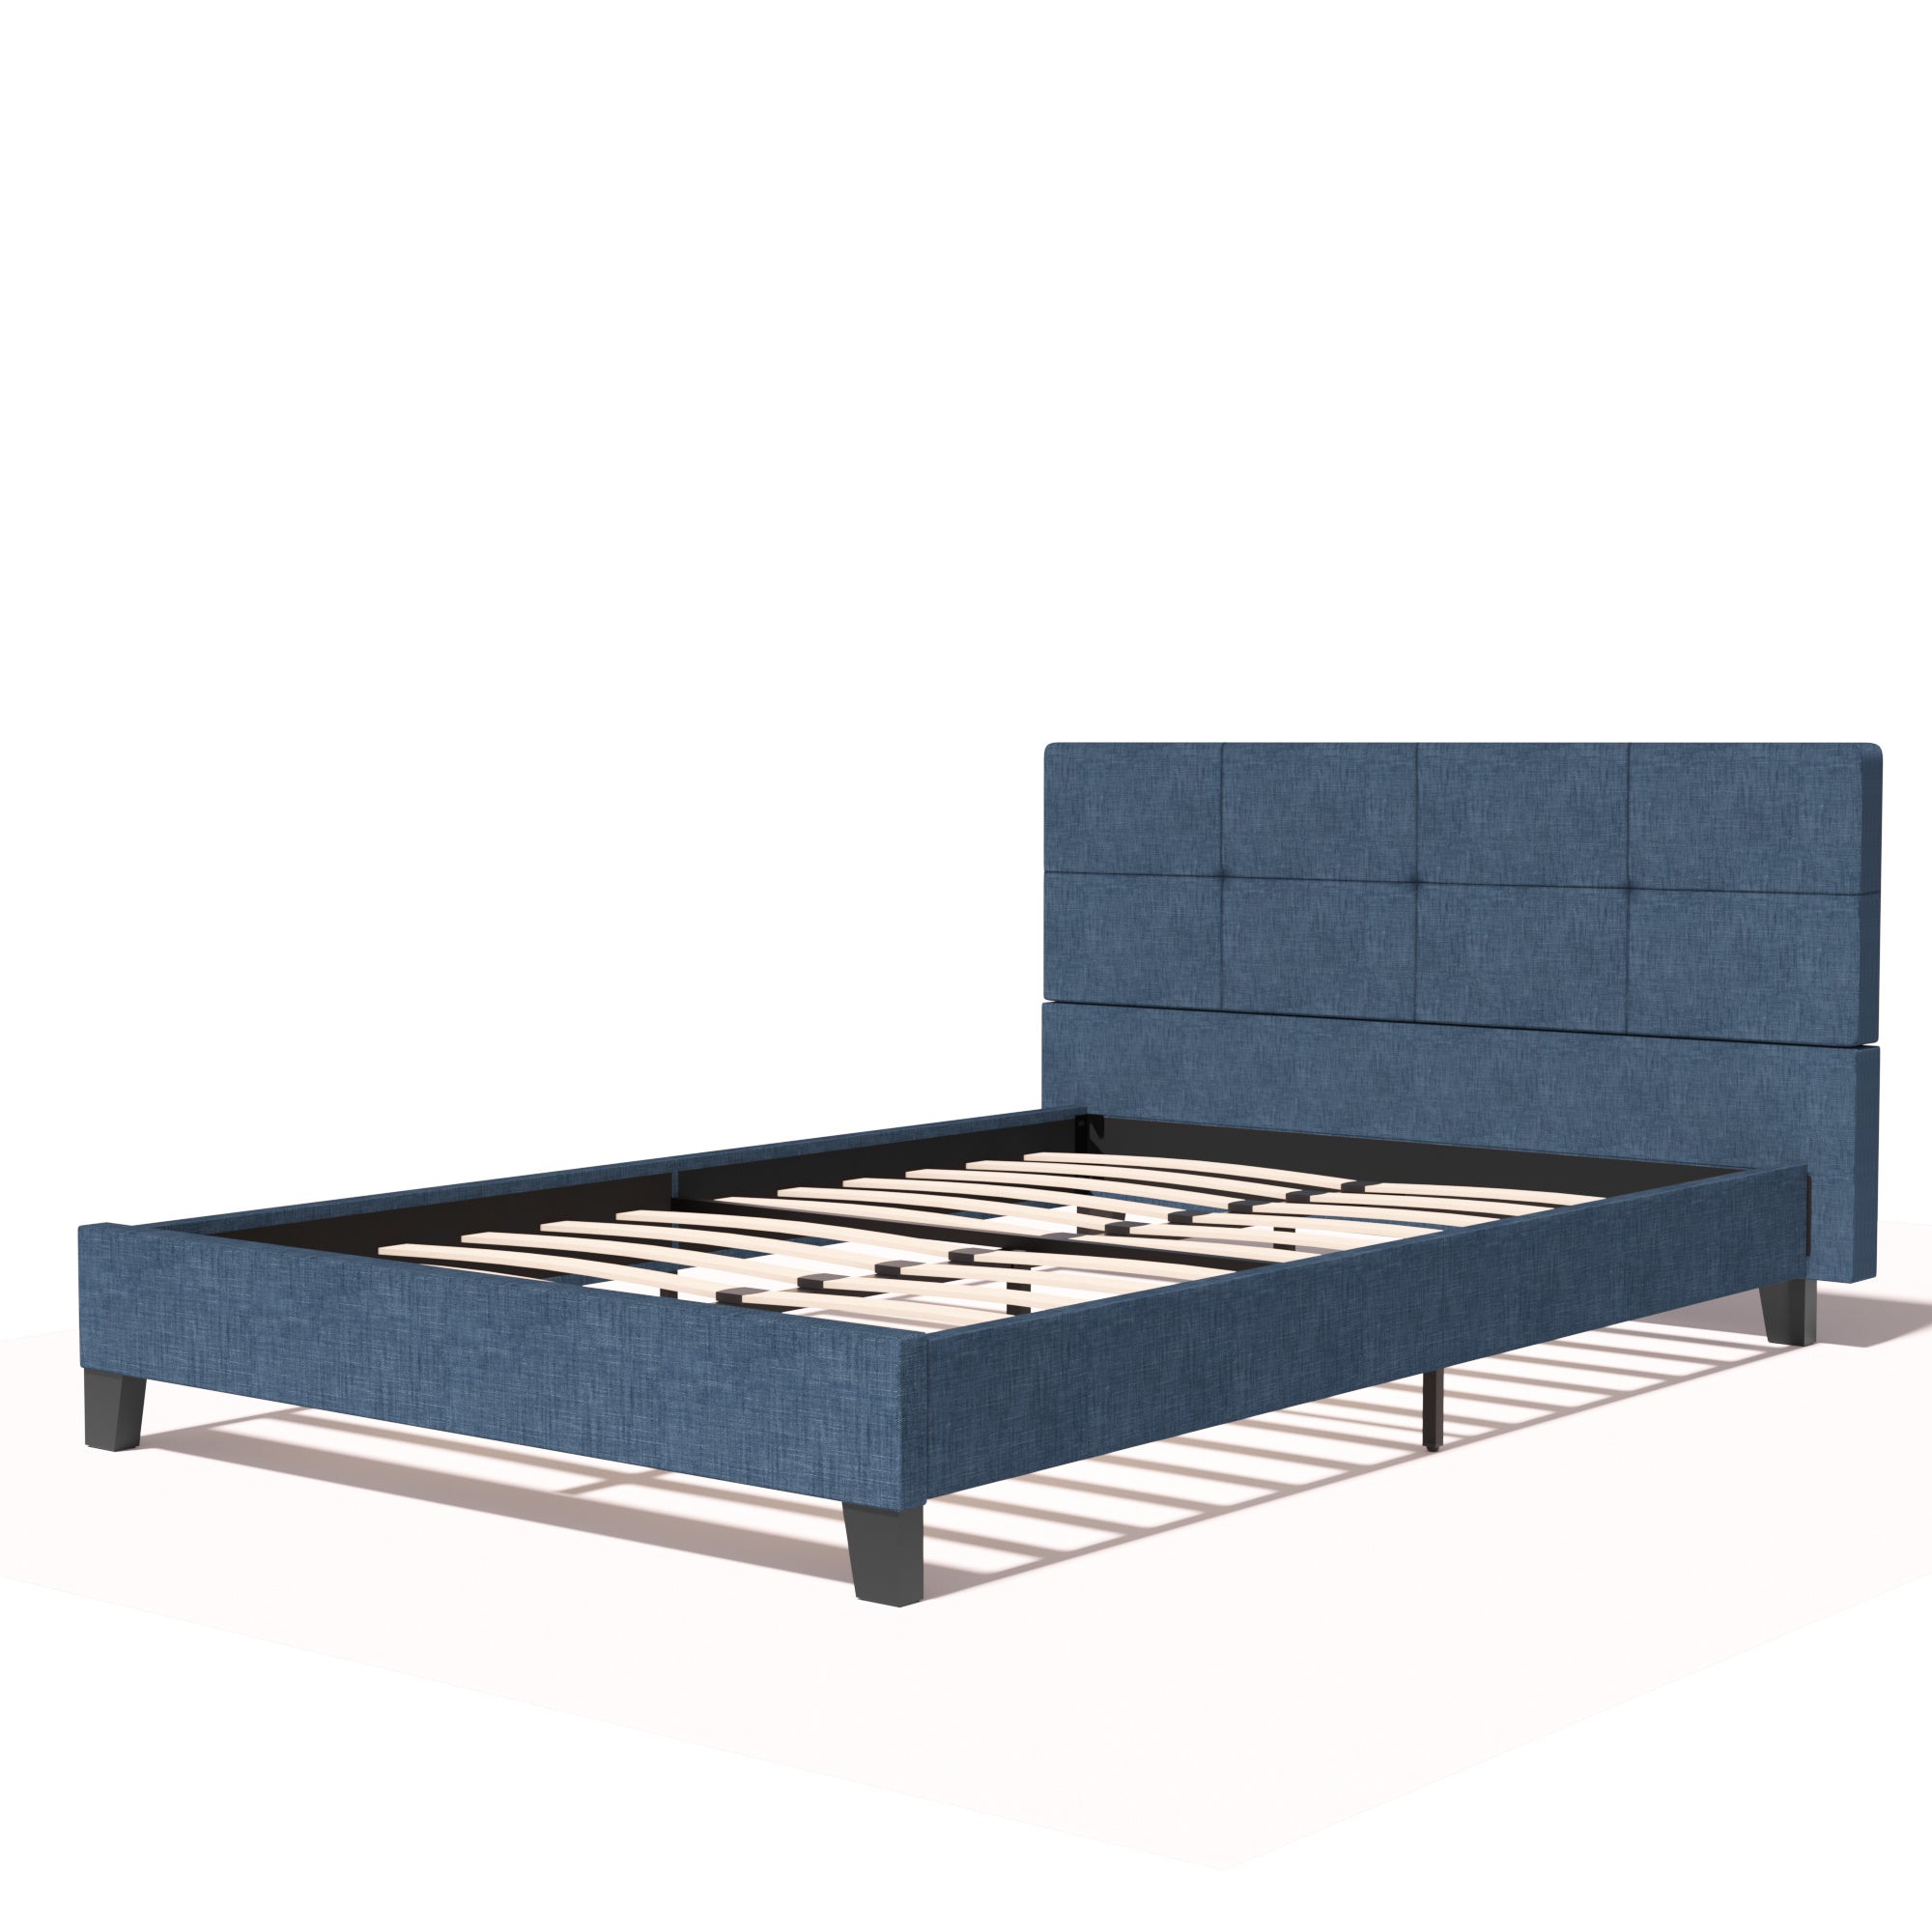 Upholstered Linen Full Platform Bed with Metal Frame and Tufted Square Stitched Headboard - Strong Wood Slats Support - Blue Cloth